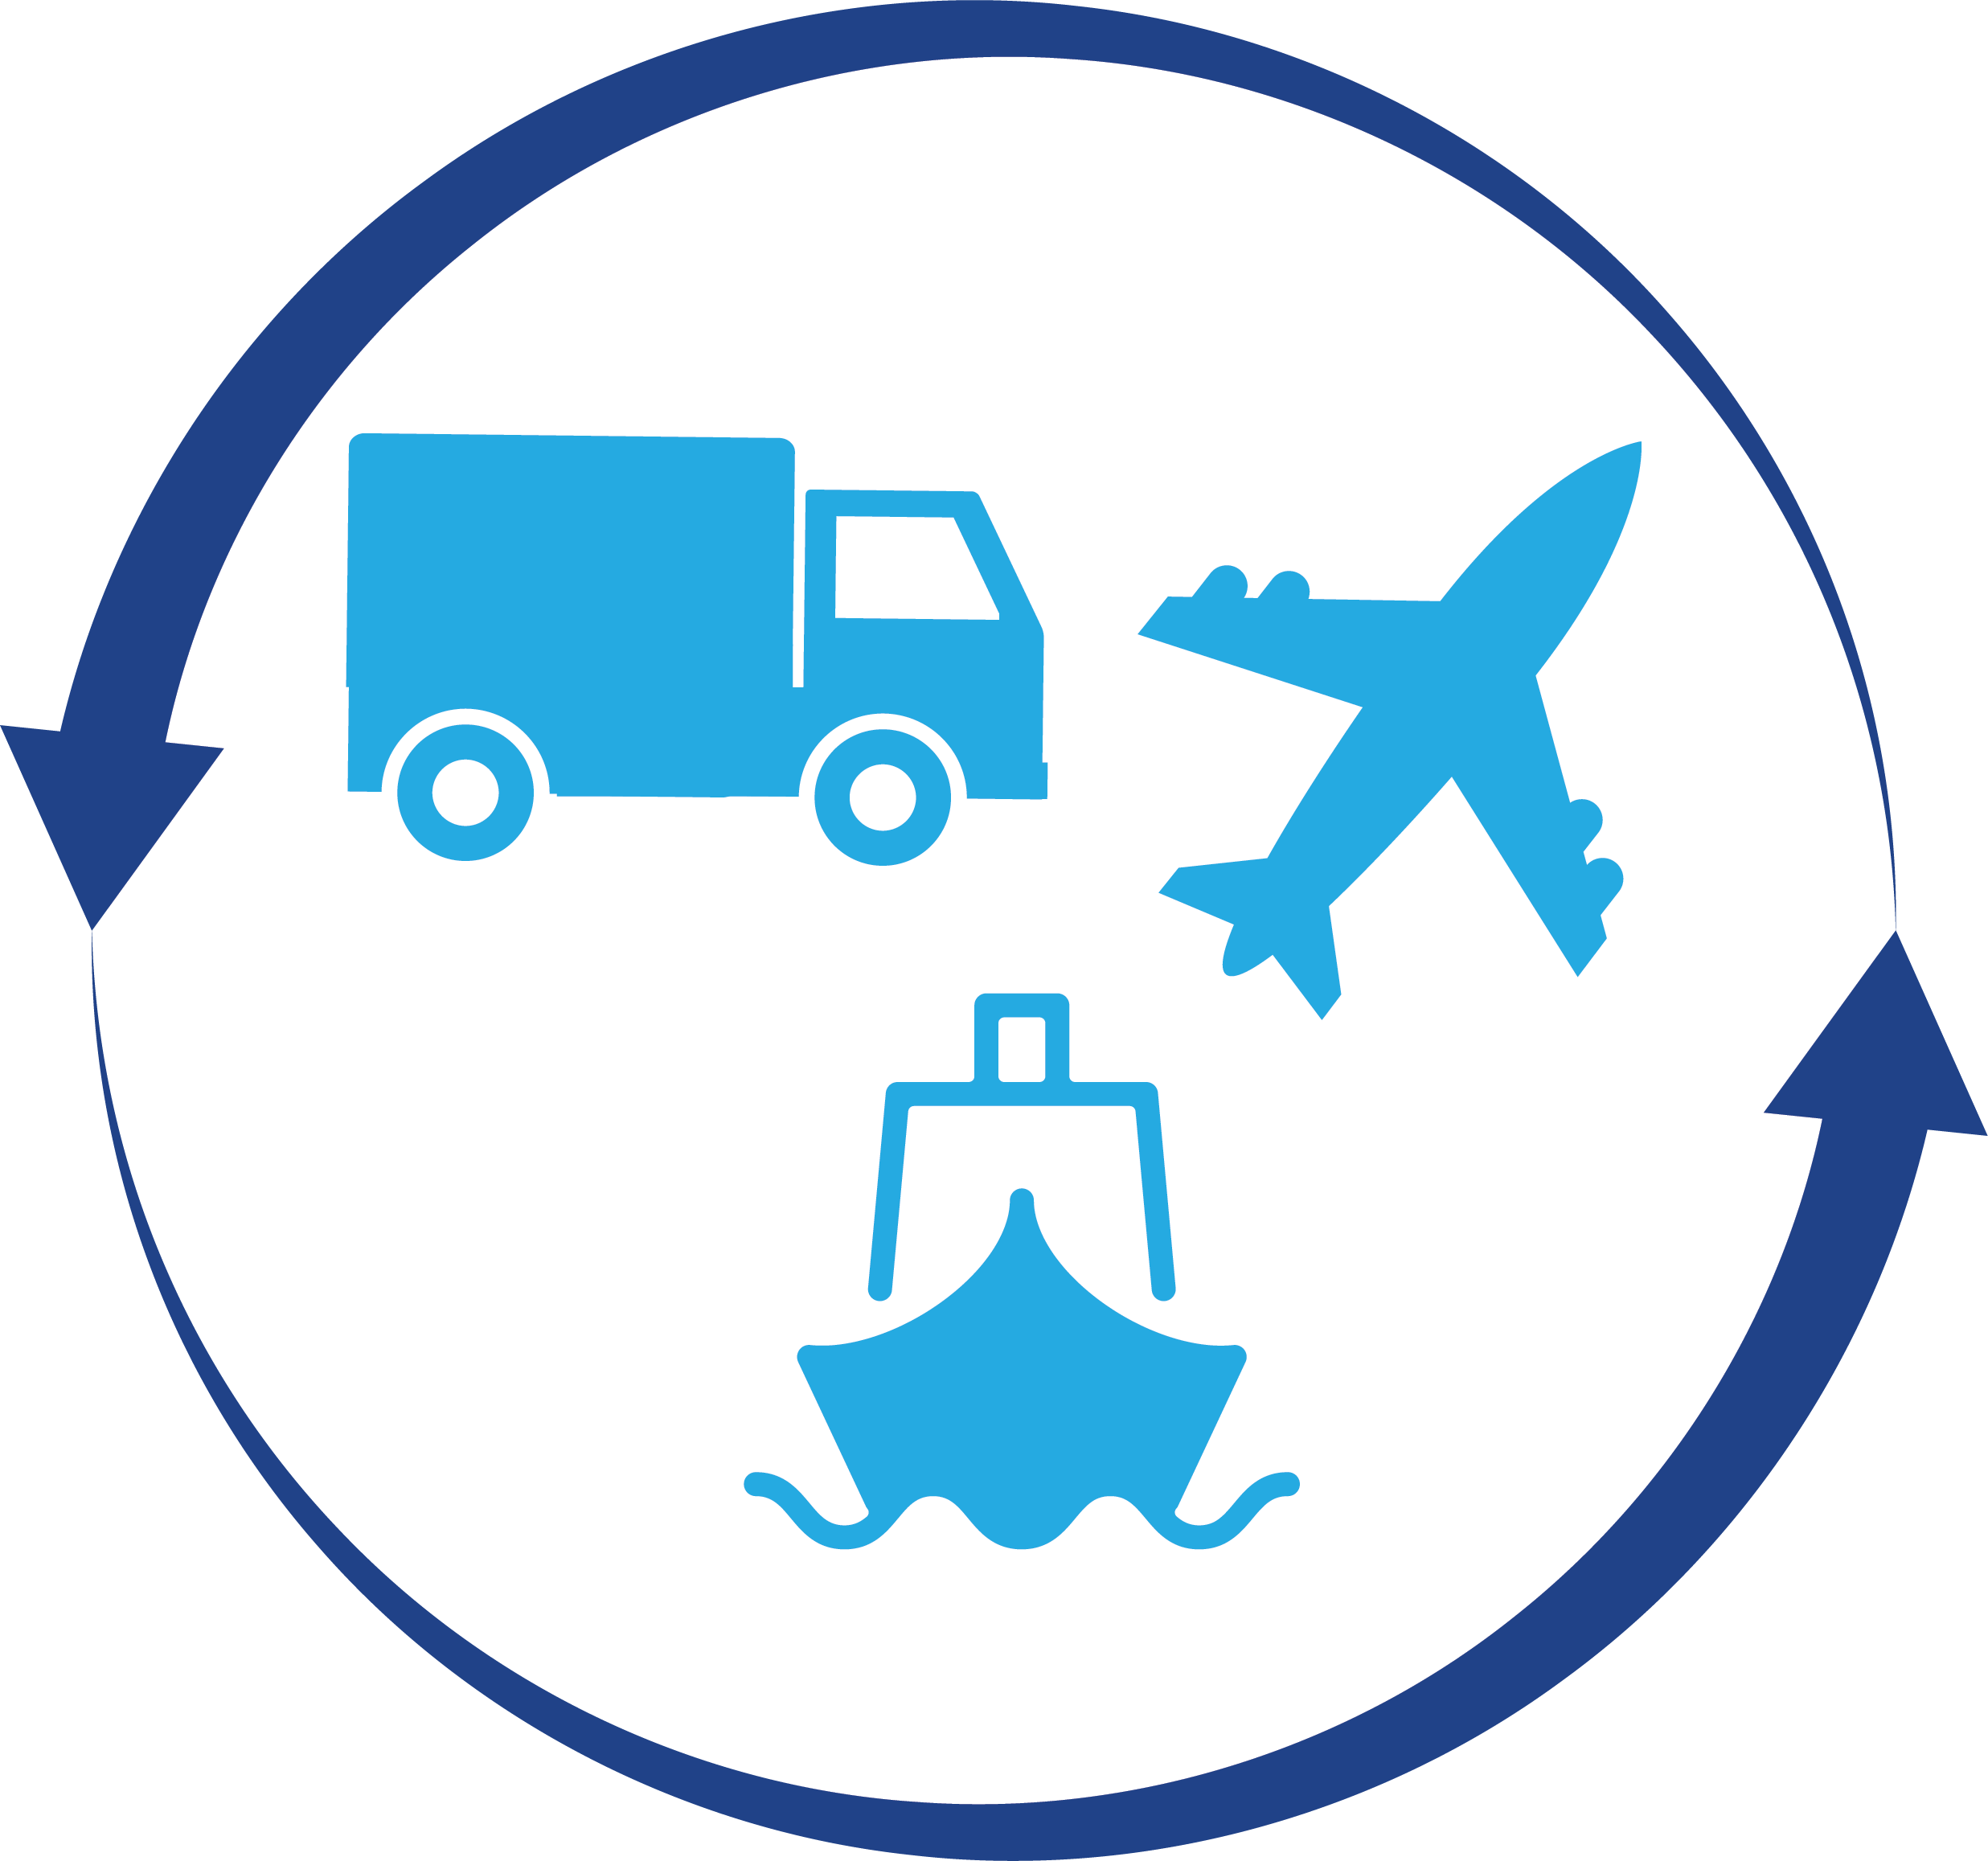 icon of a truck, plane, and ship